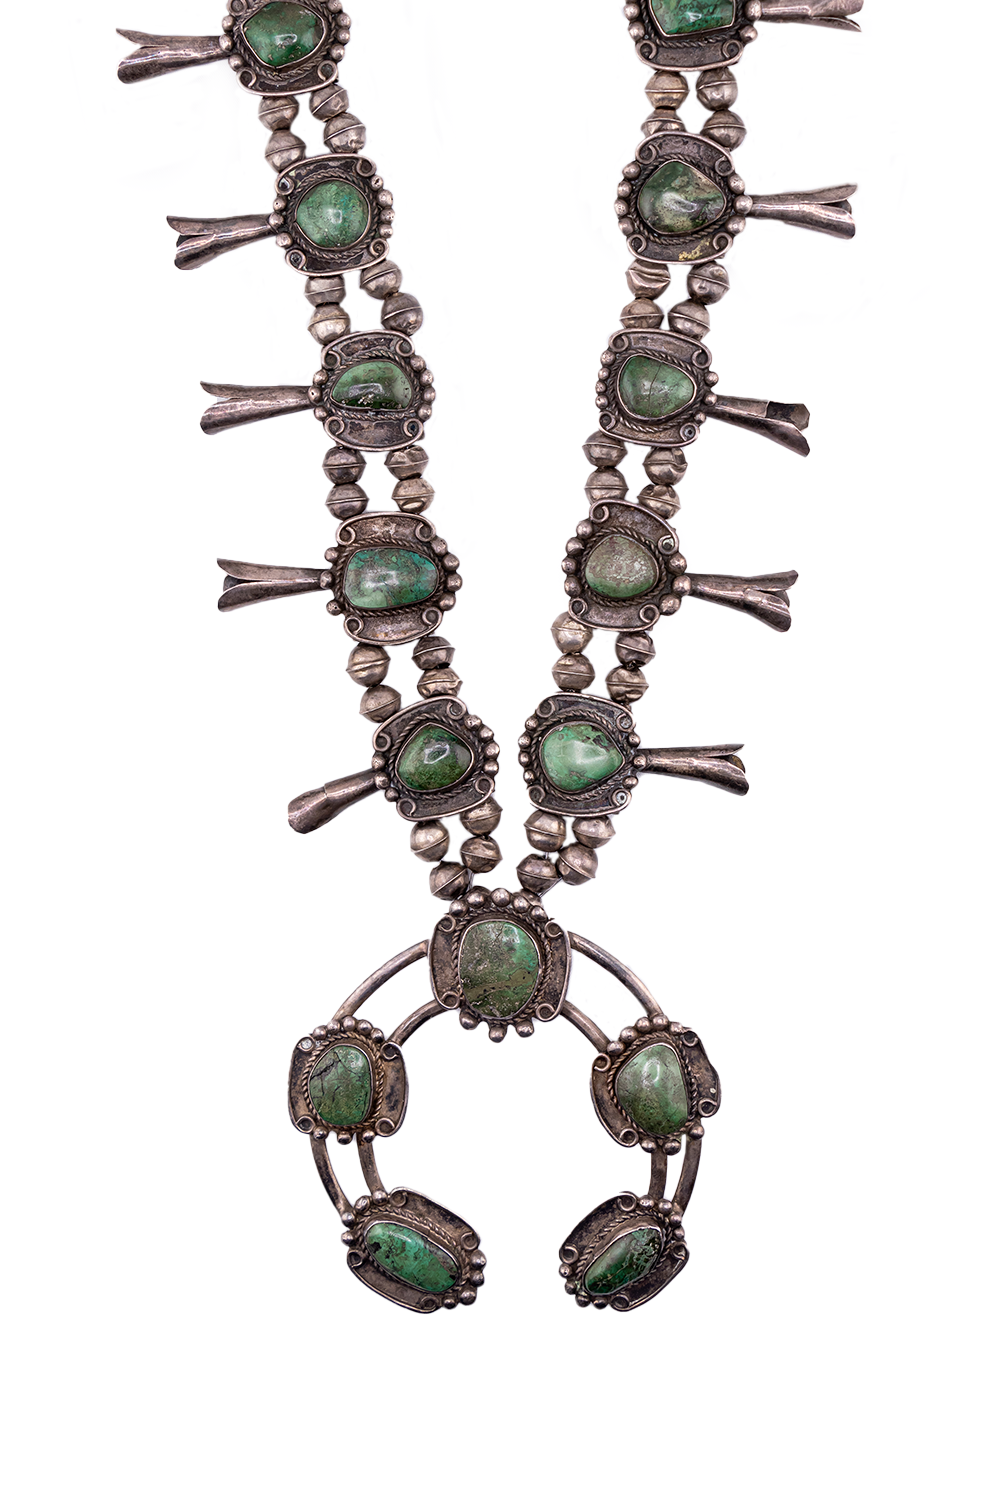 Very Old Navajo Carico Lake Turquoise Squash Blossom Necklace